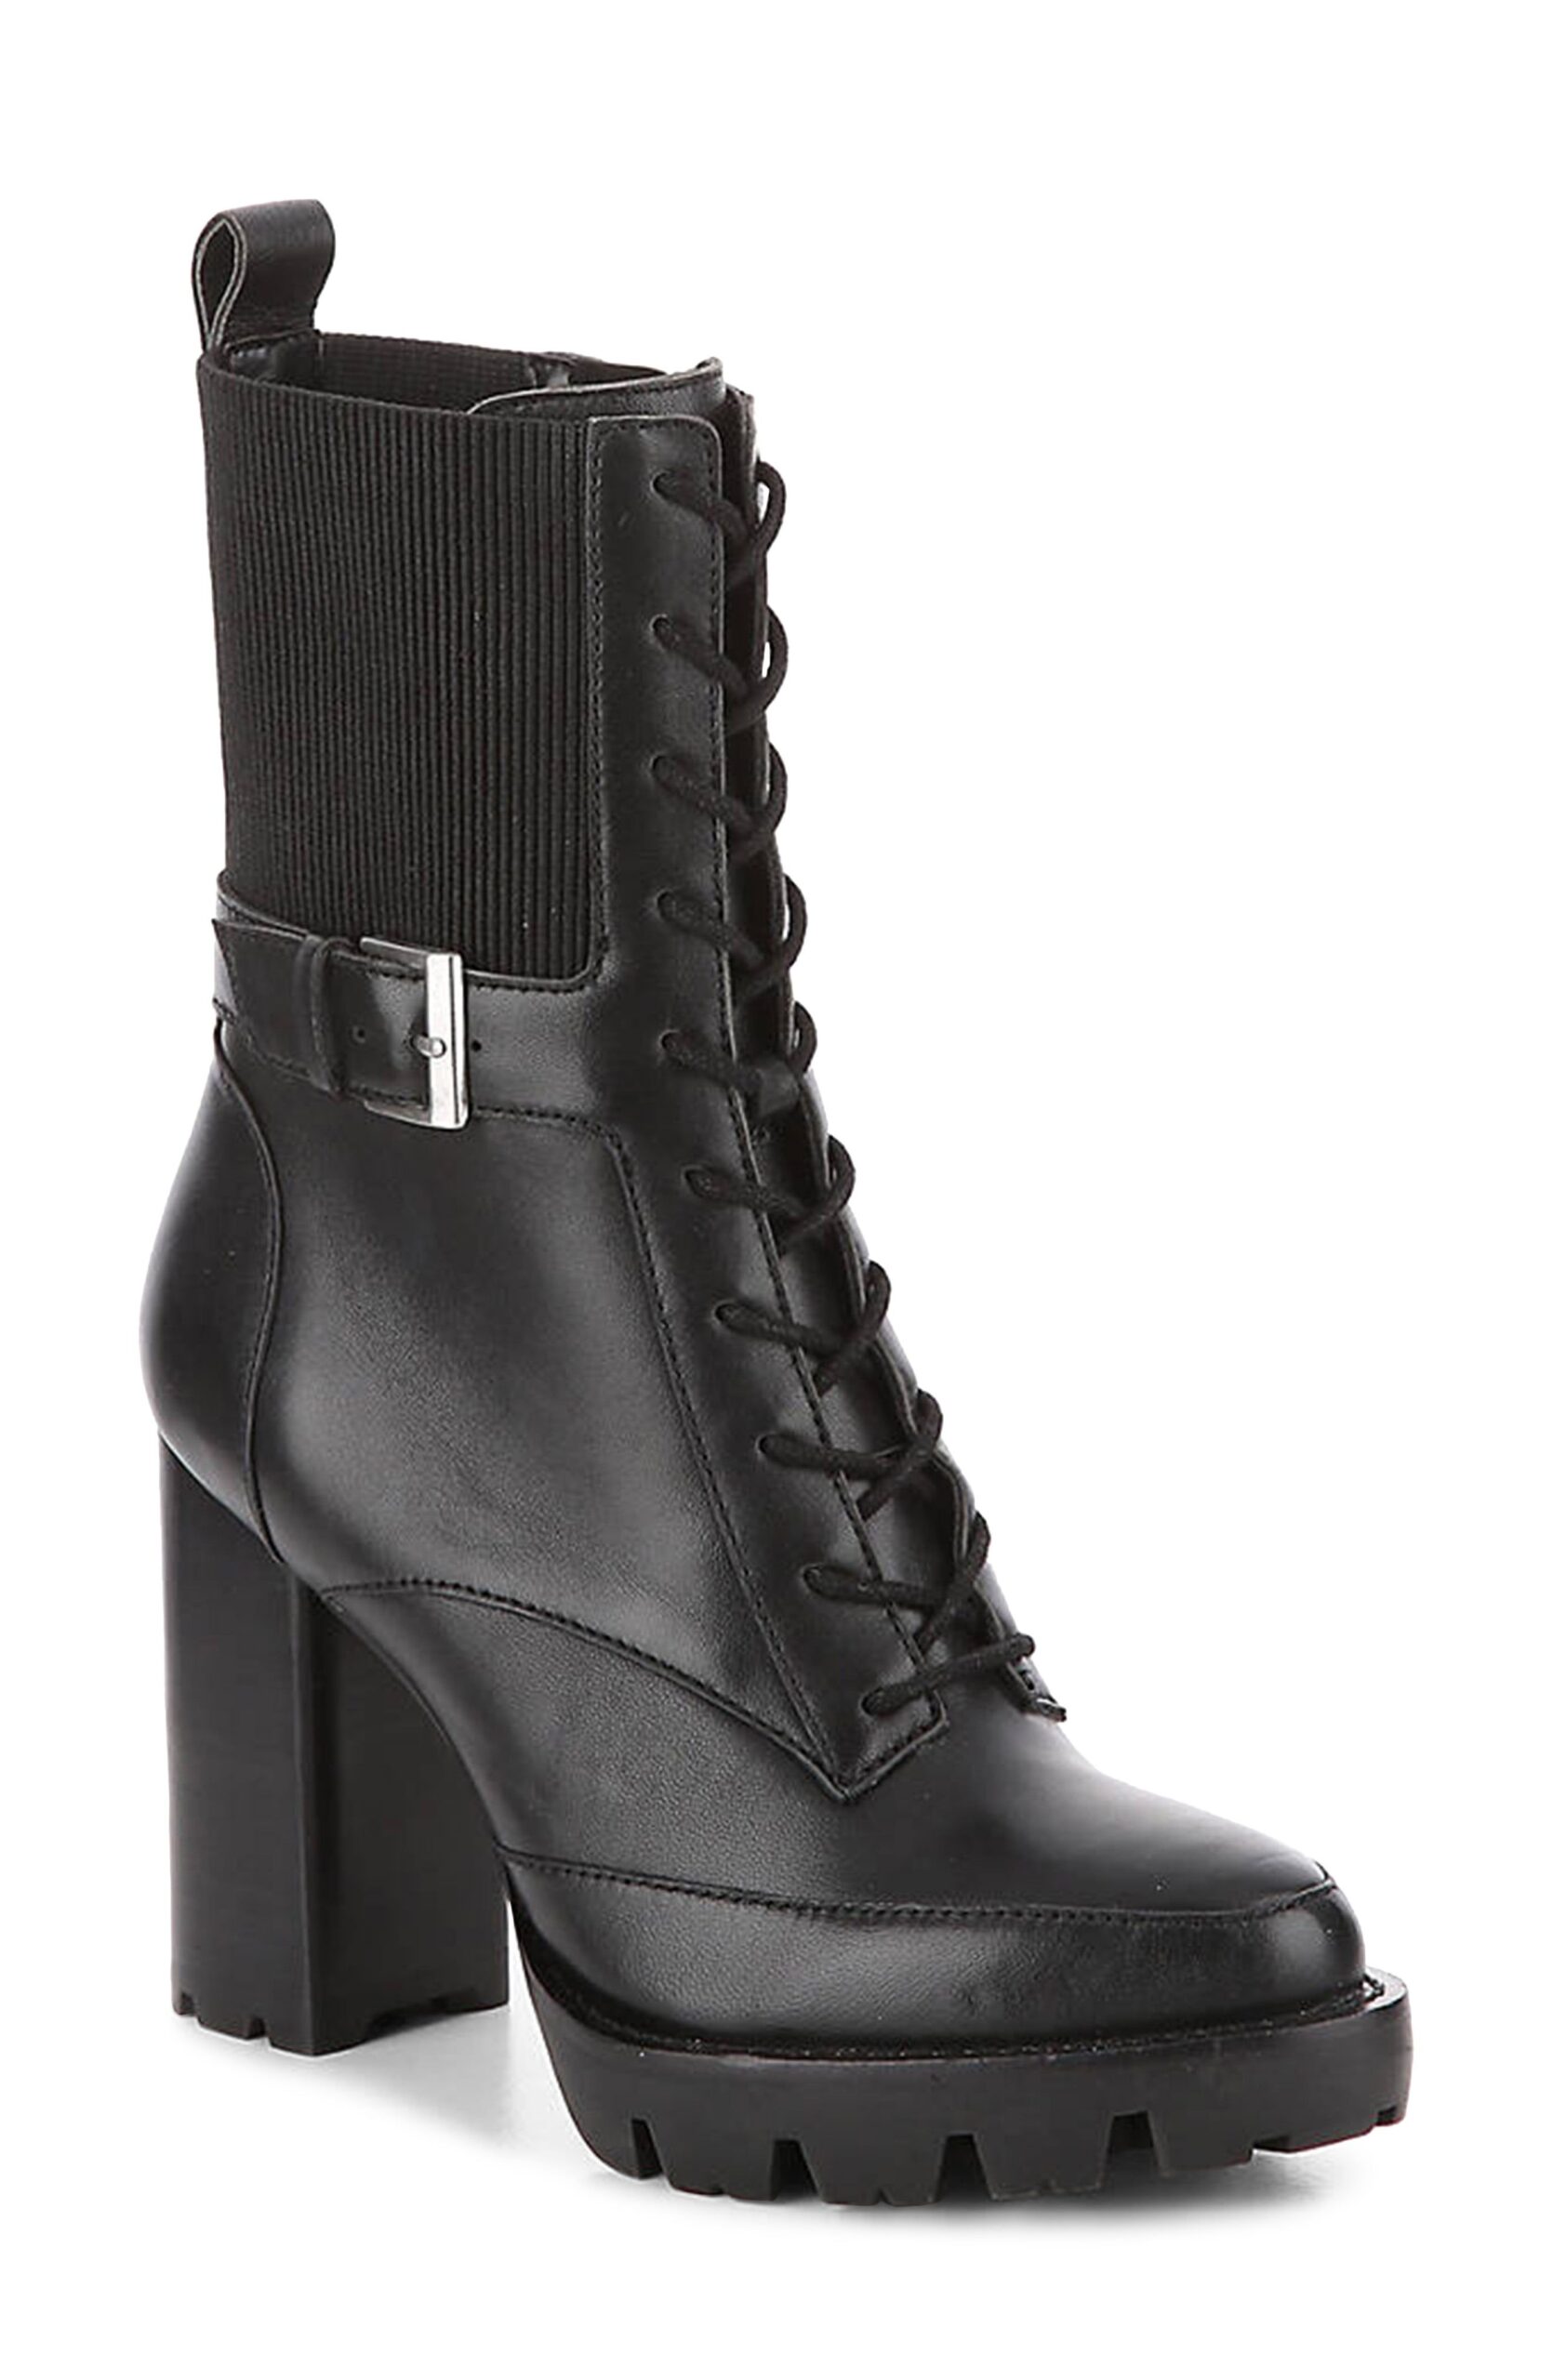 Stay  In Top Style With Charles David Boots